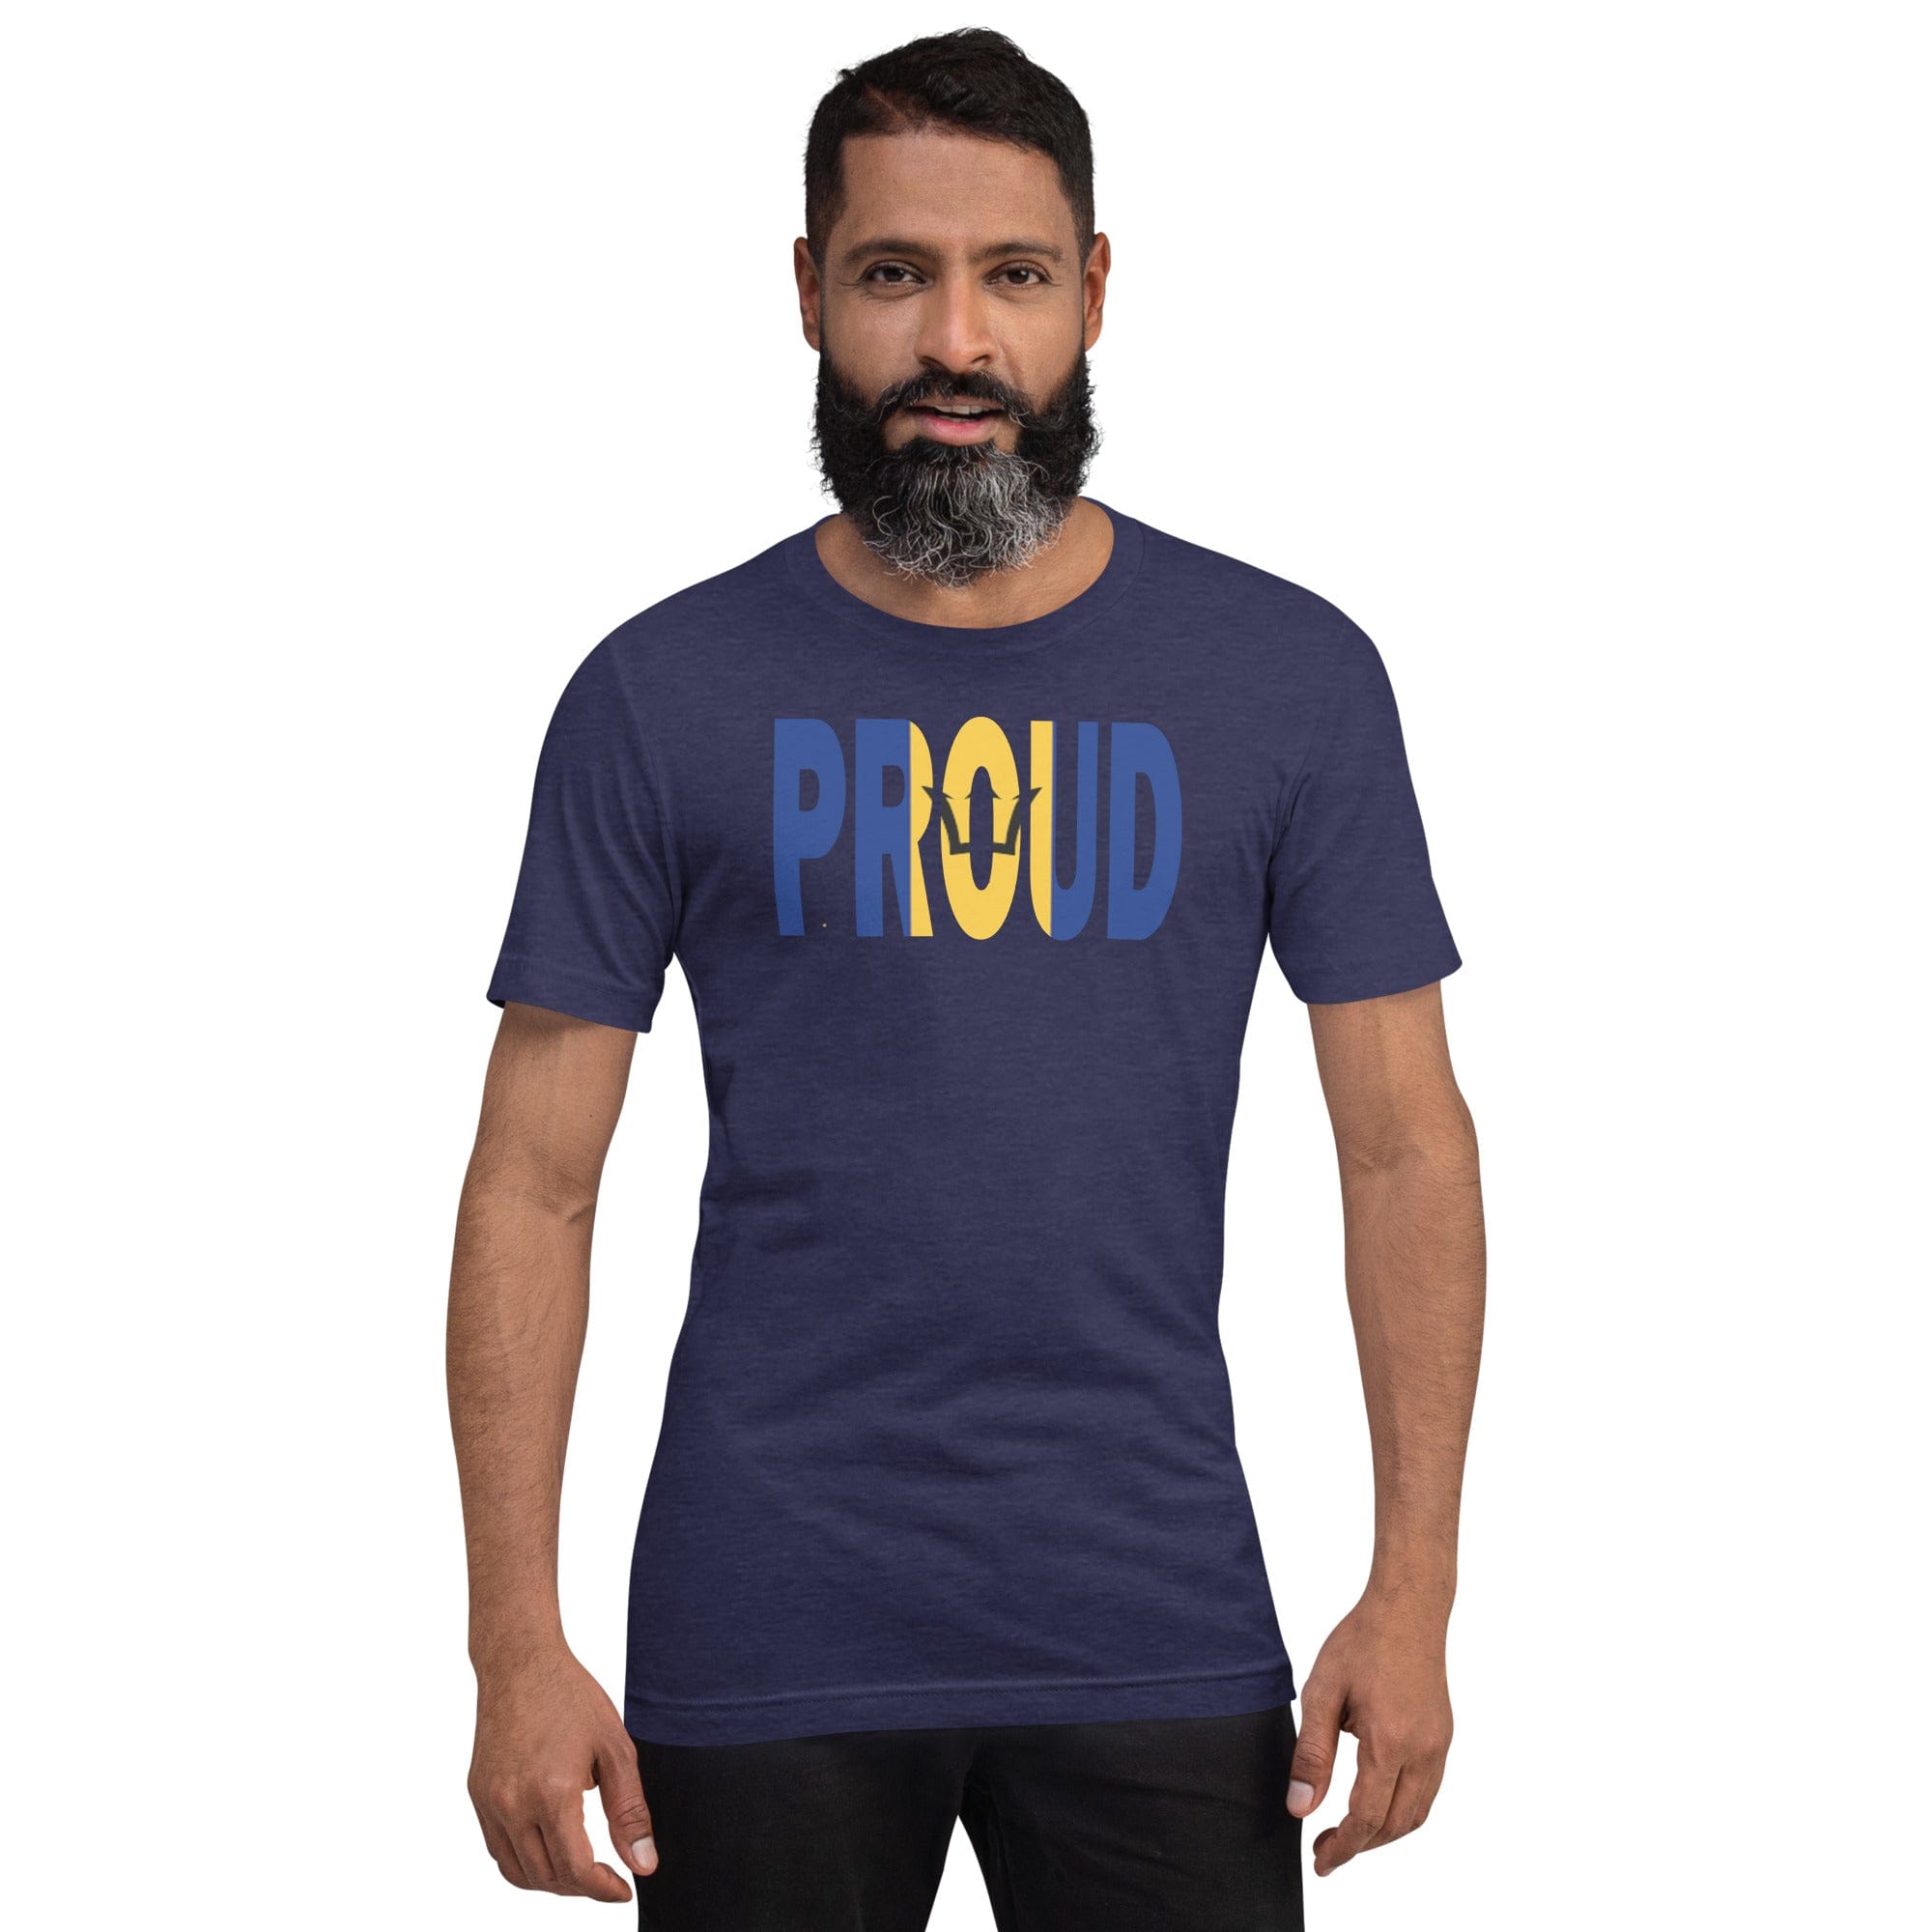 Proud Barbados Flag navy color t-shirt on a black man.